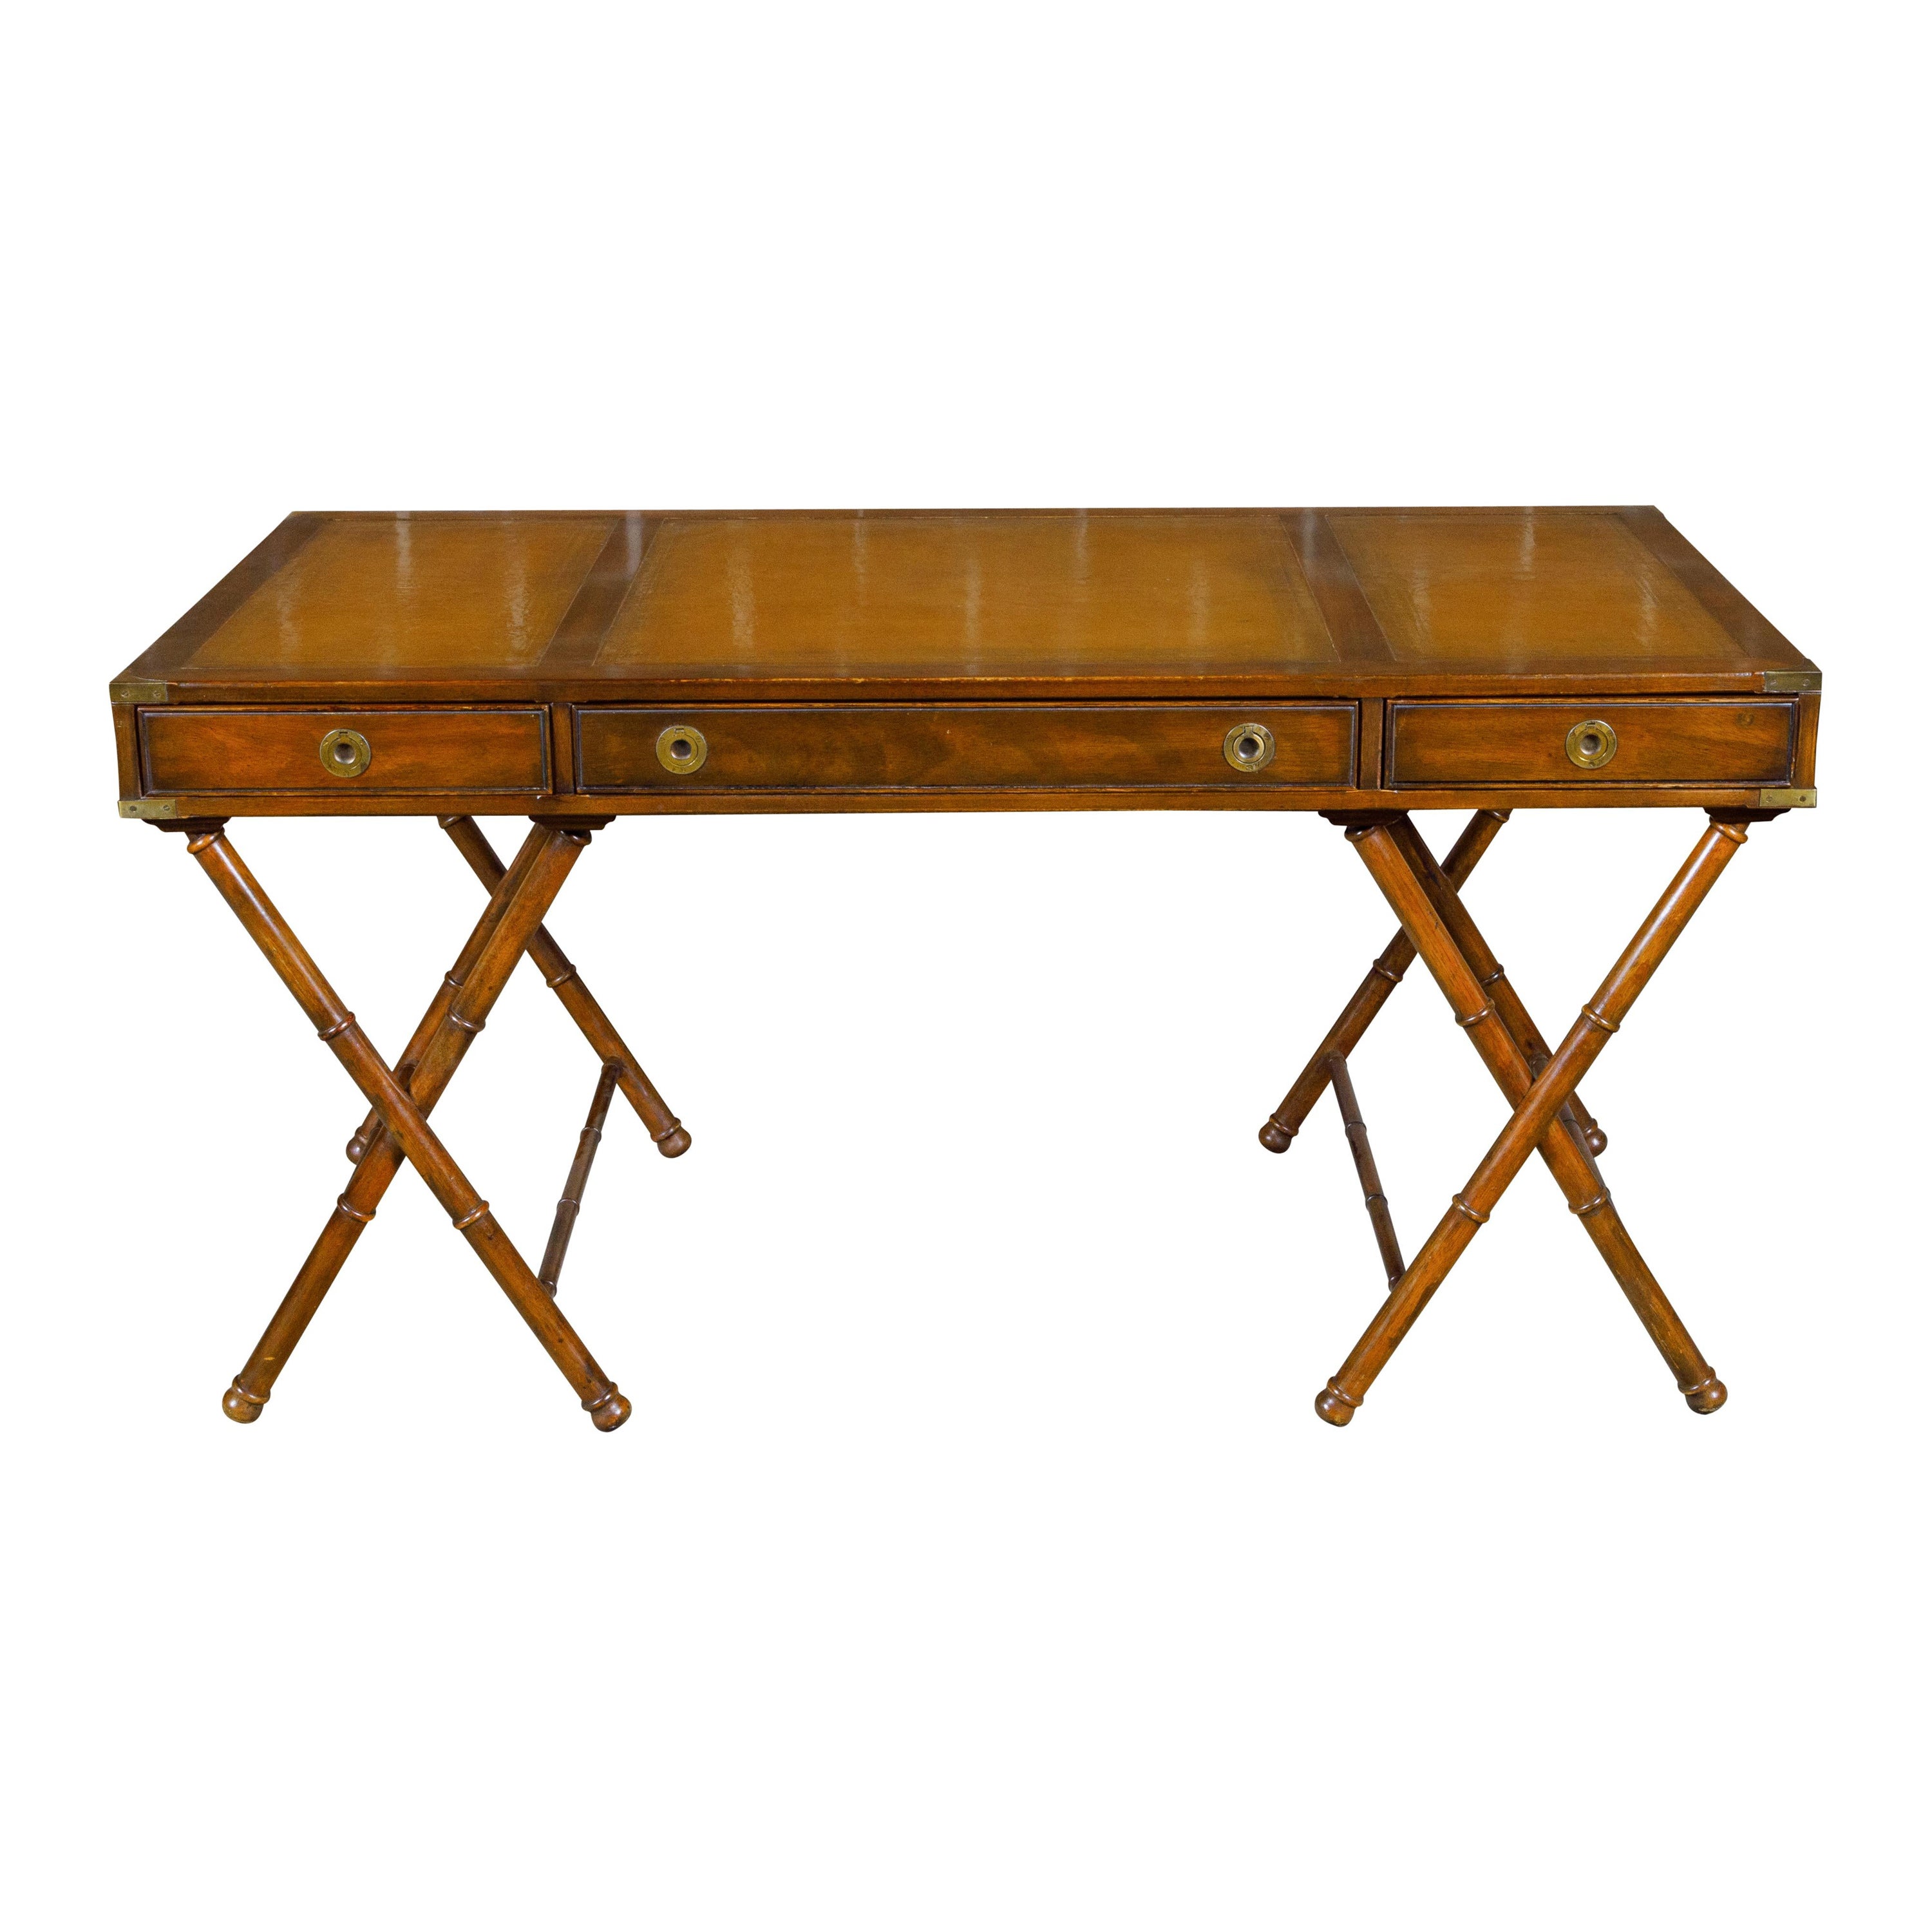 English Campaign Midcentury Desk with Faux Bamboo Base and Leather Top